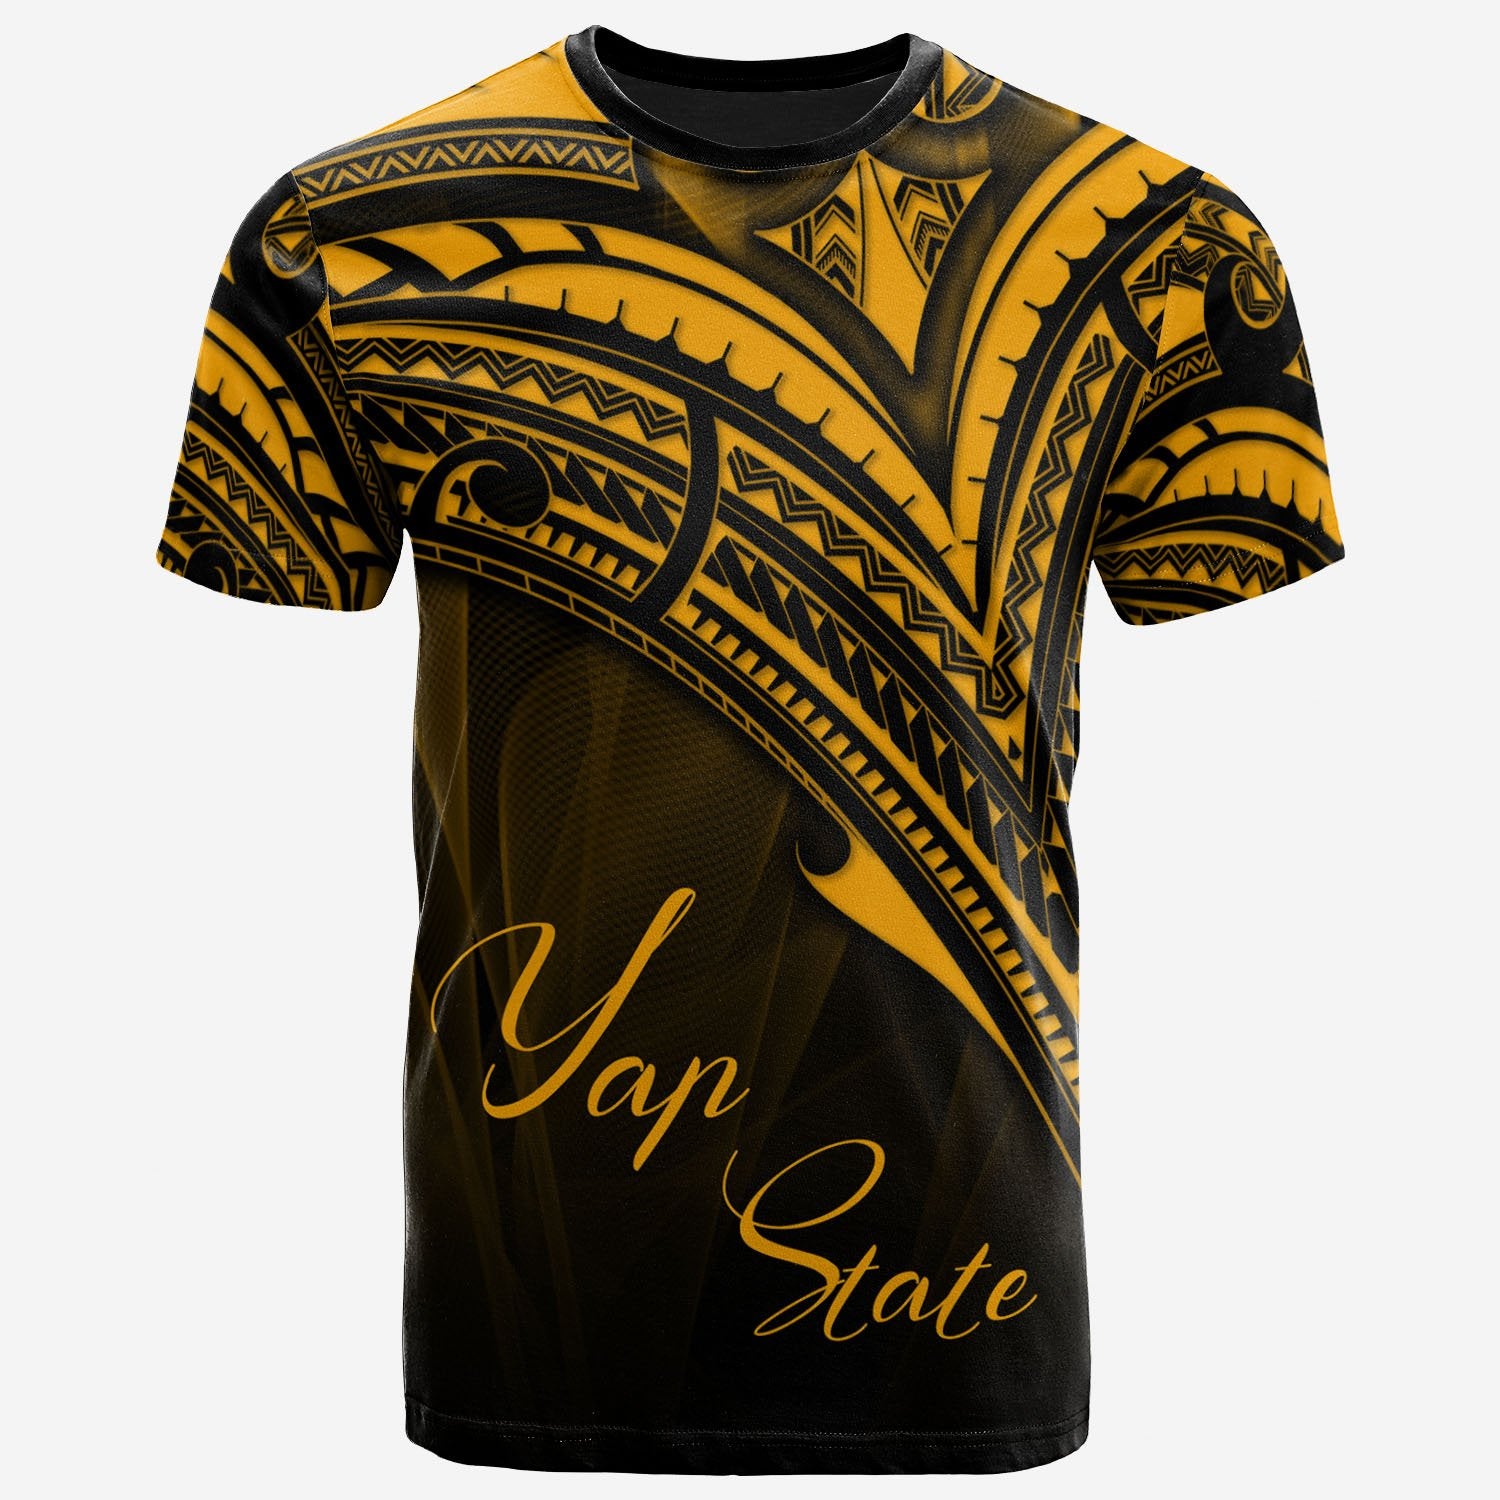 Yap State T Shirt Gold Color Cross Style Unisex Black - Polynesian Pride